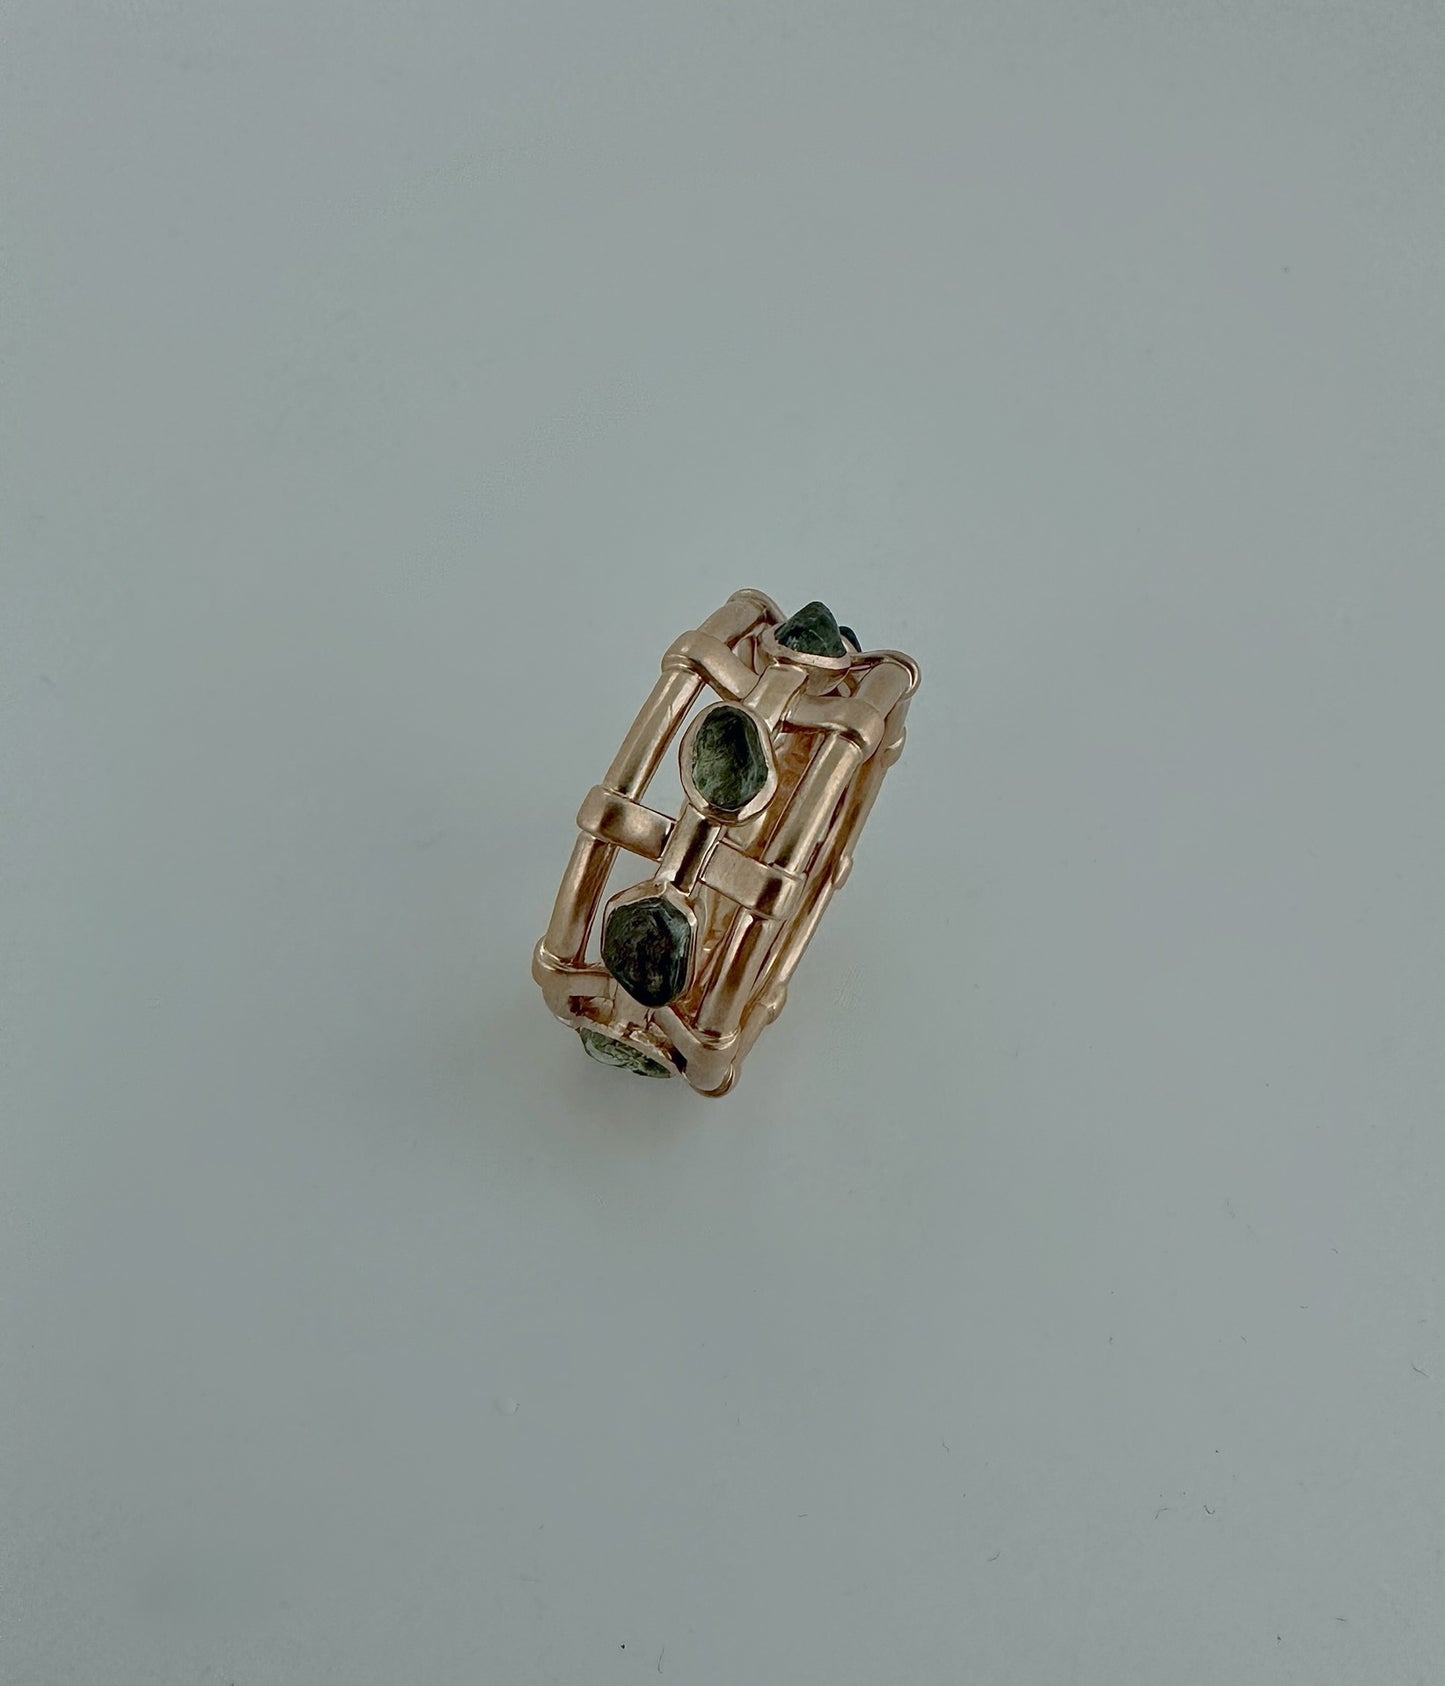 "Harmony" Montana 7.88 Sapphire Meteor Ring in 18k Rose Gold